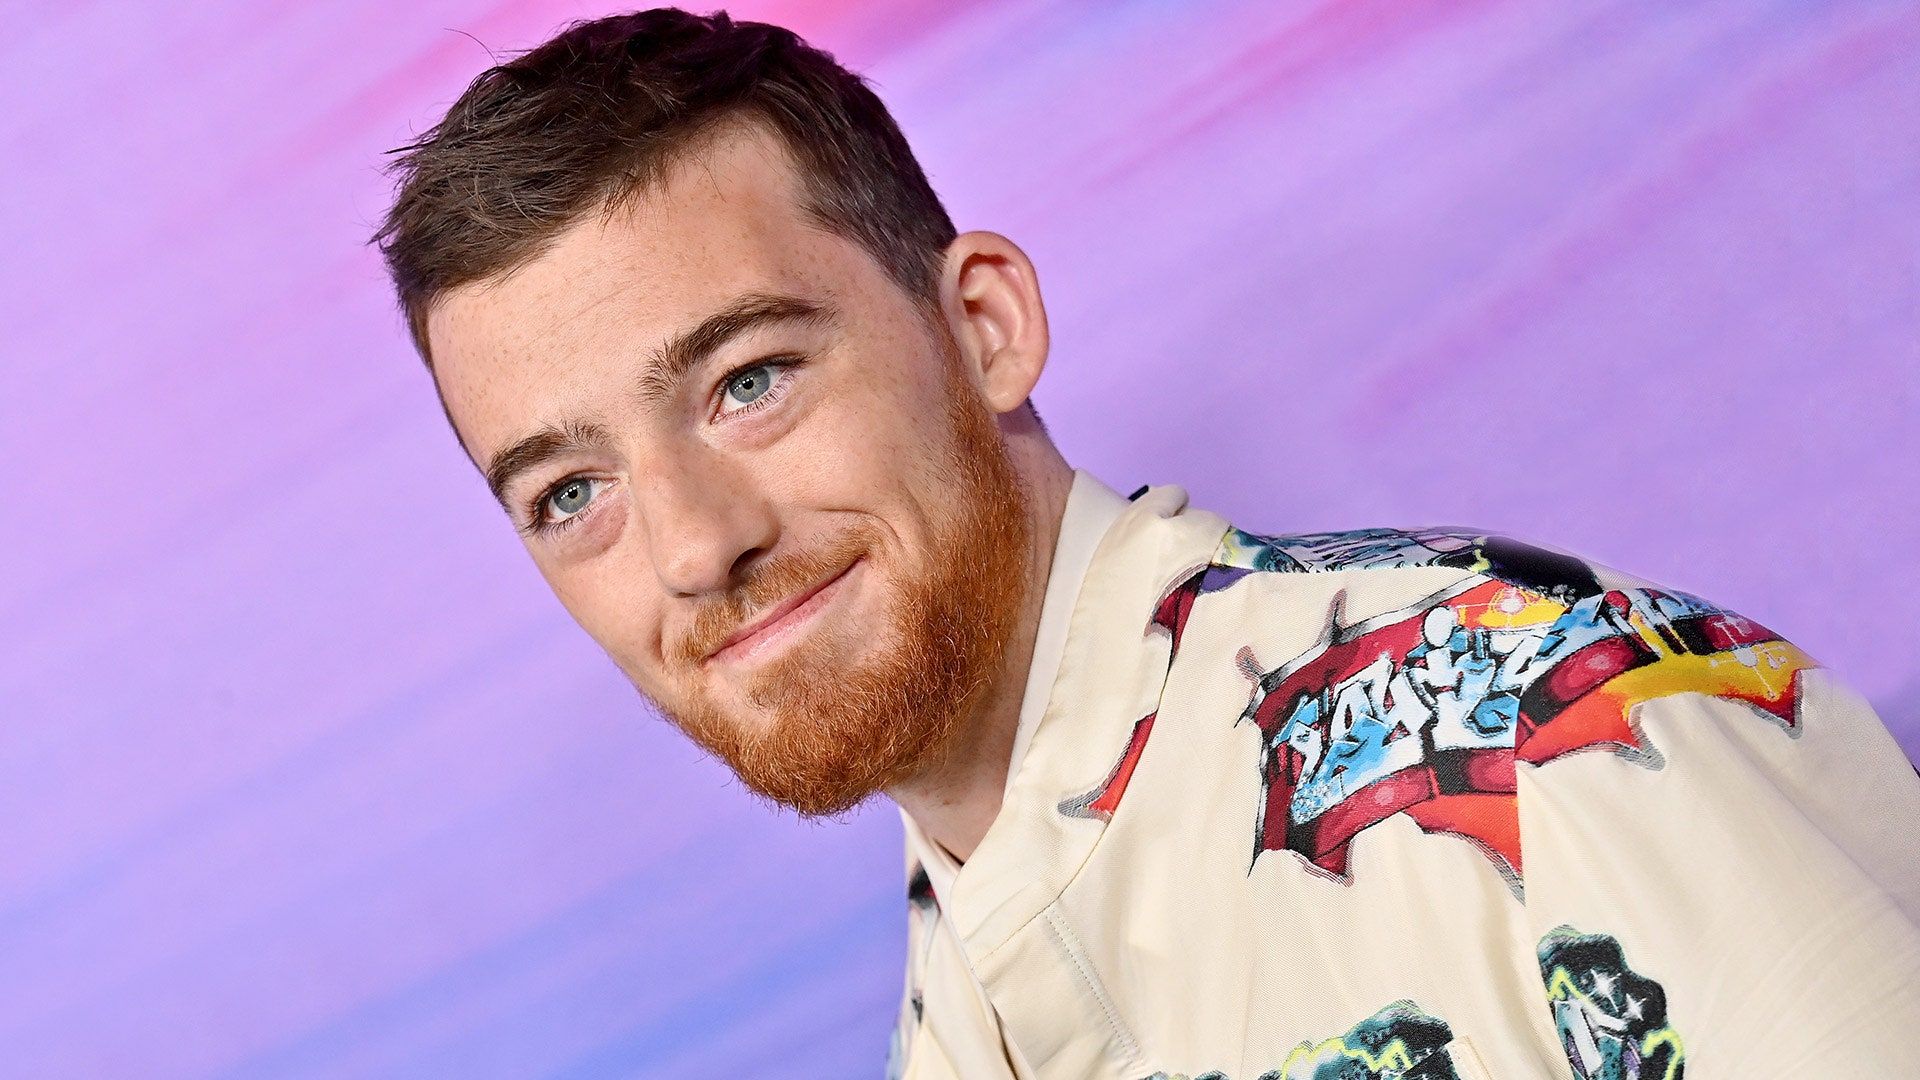 Mac Miller's family has released a statement following the rapper's death. - Angus Cloud